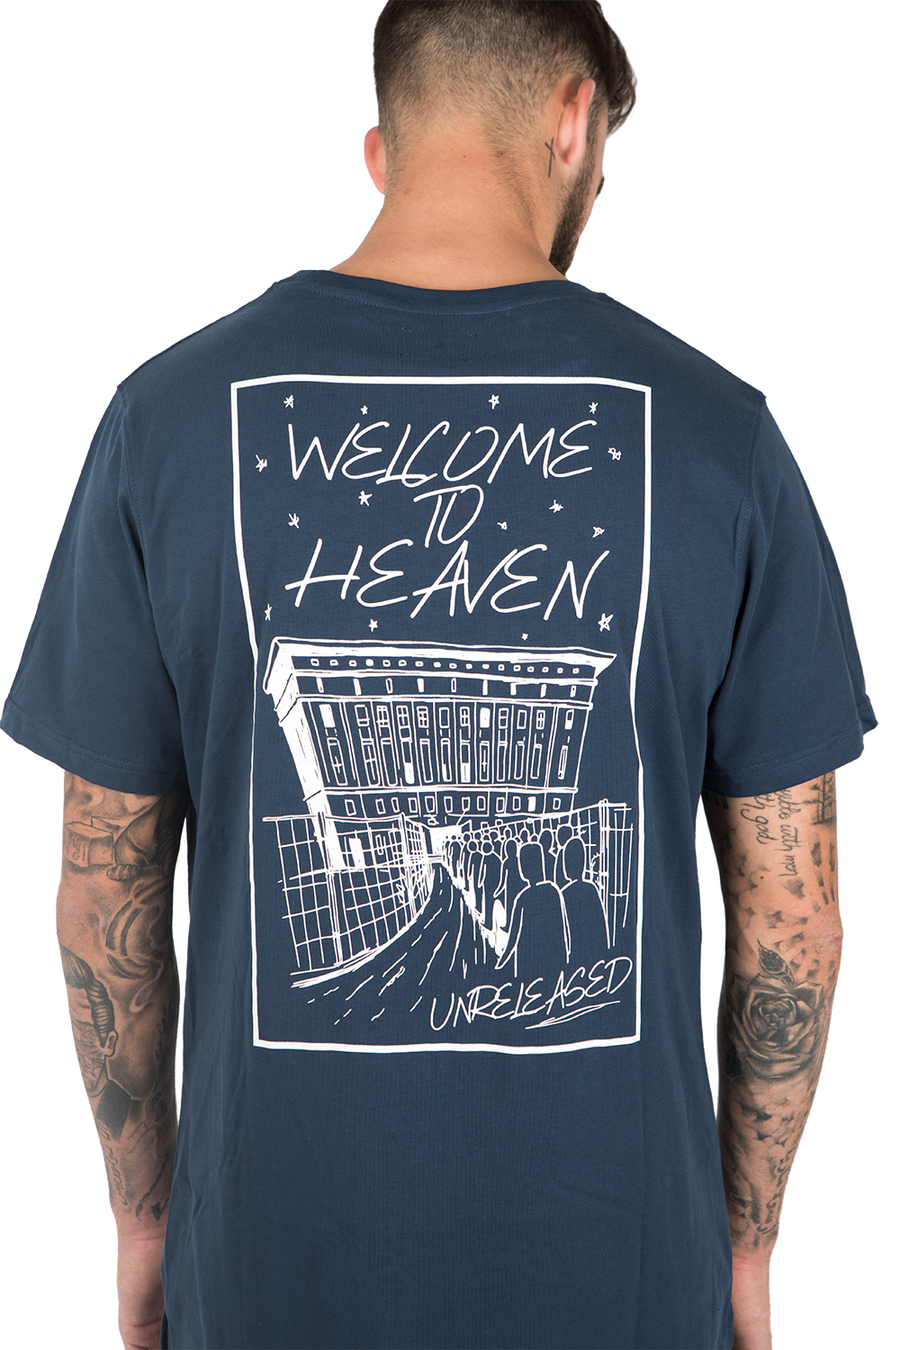 PRINTED T-SHIRT “WELCOME TO HEAVEN”